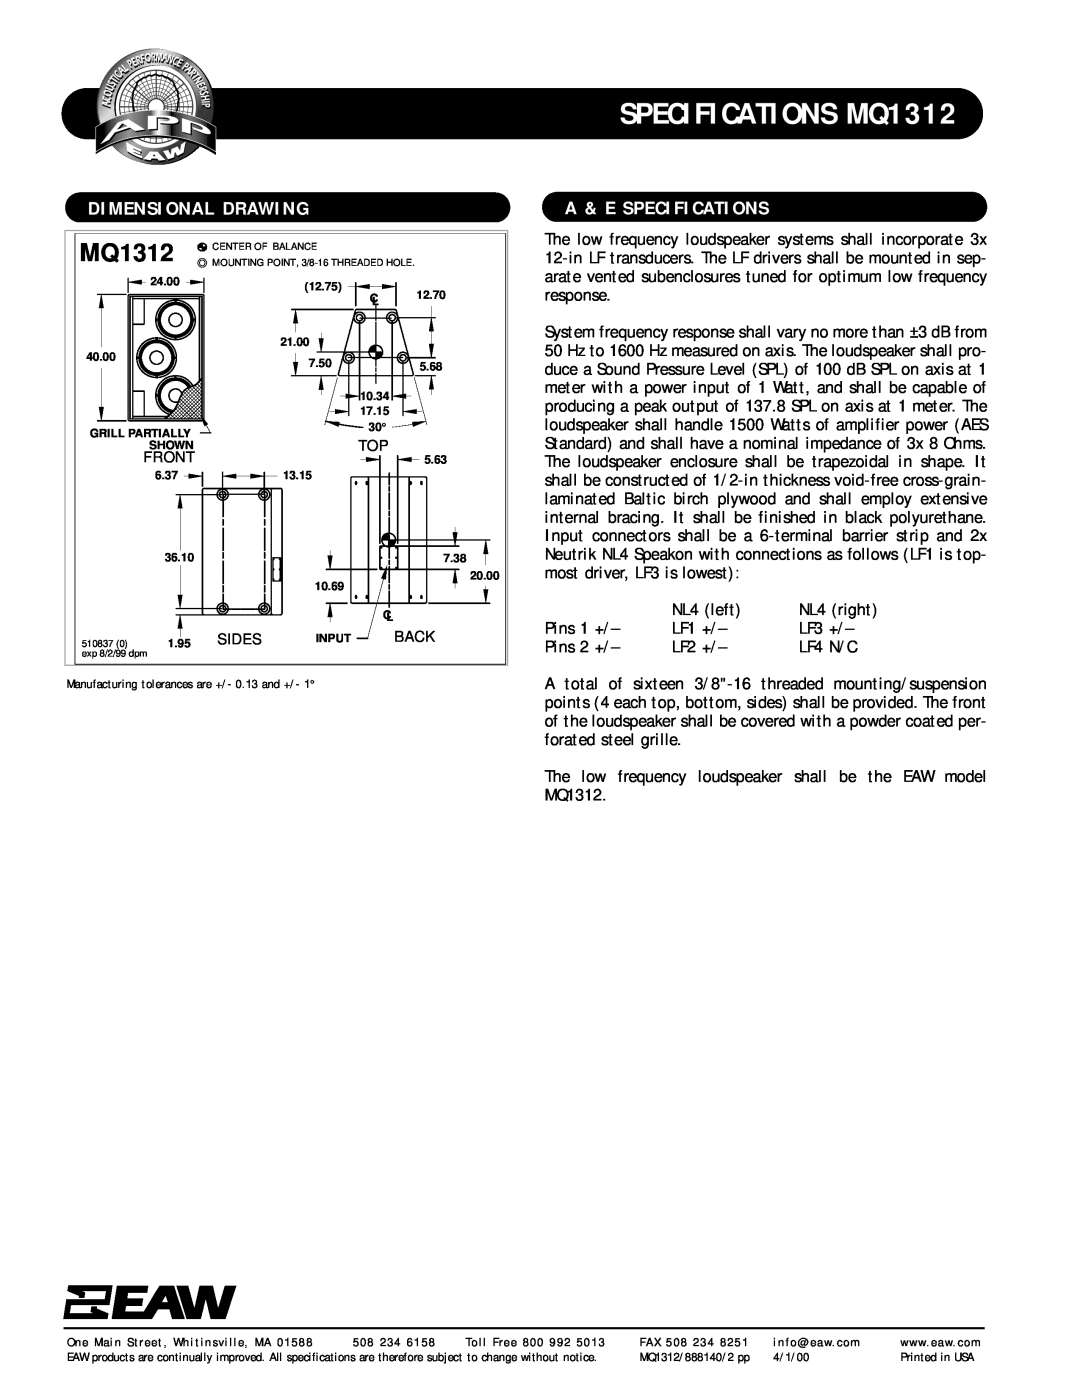 EAW specifications Dimensional Drawing, A & E Specifications, SPECIFICATIONS MQ1312 